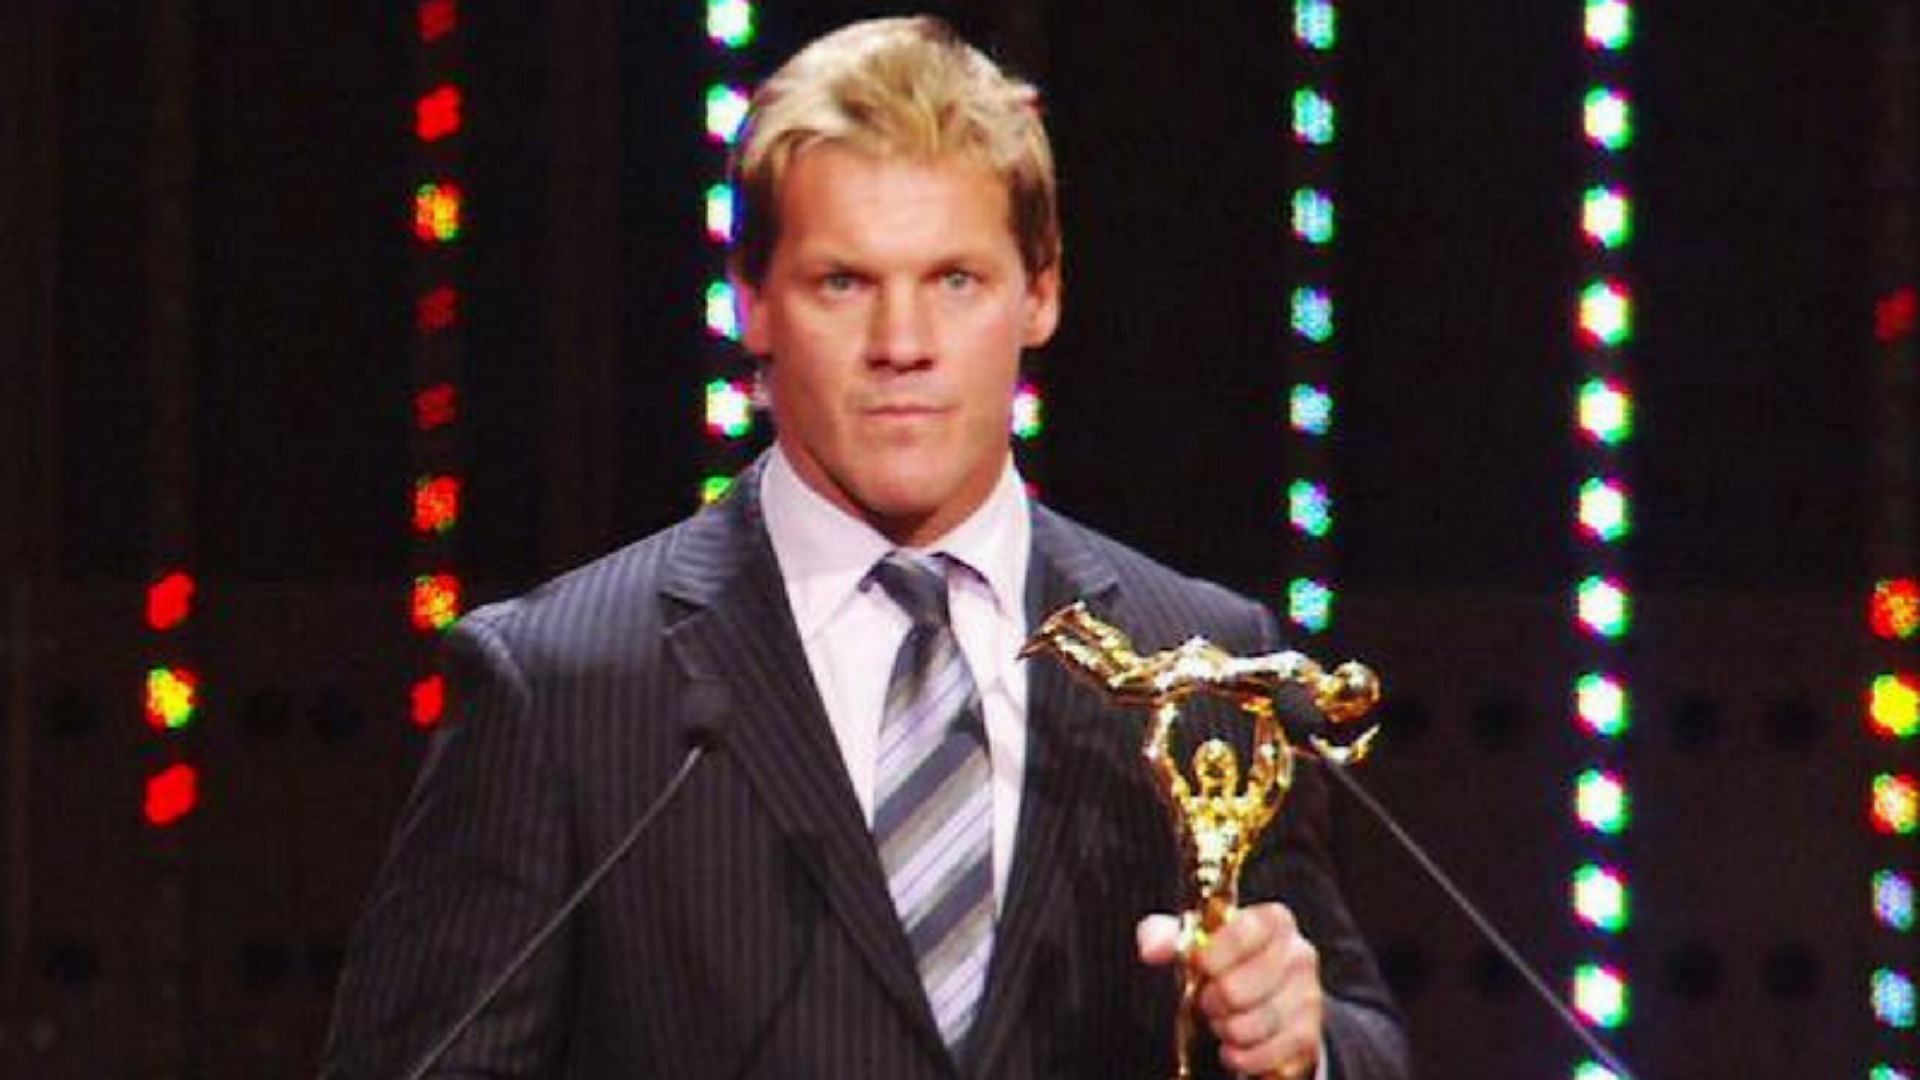 Chris Jericho is widely regarded as one of the greatest wrestlers of all time